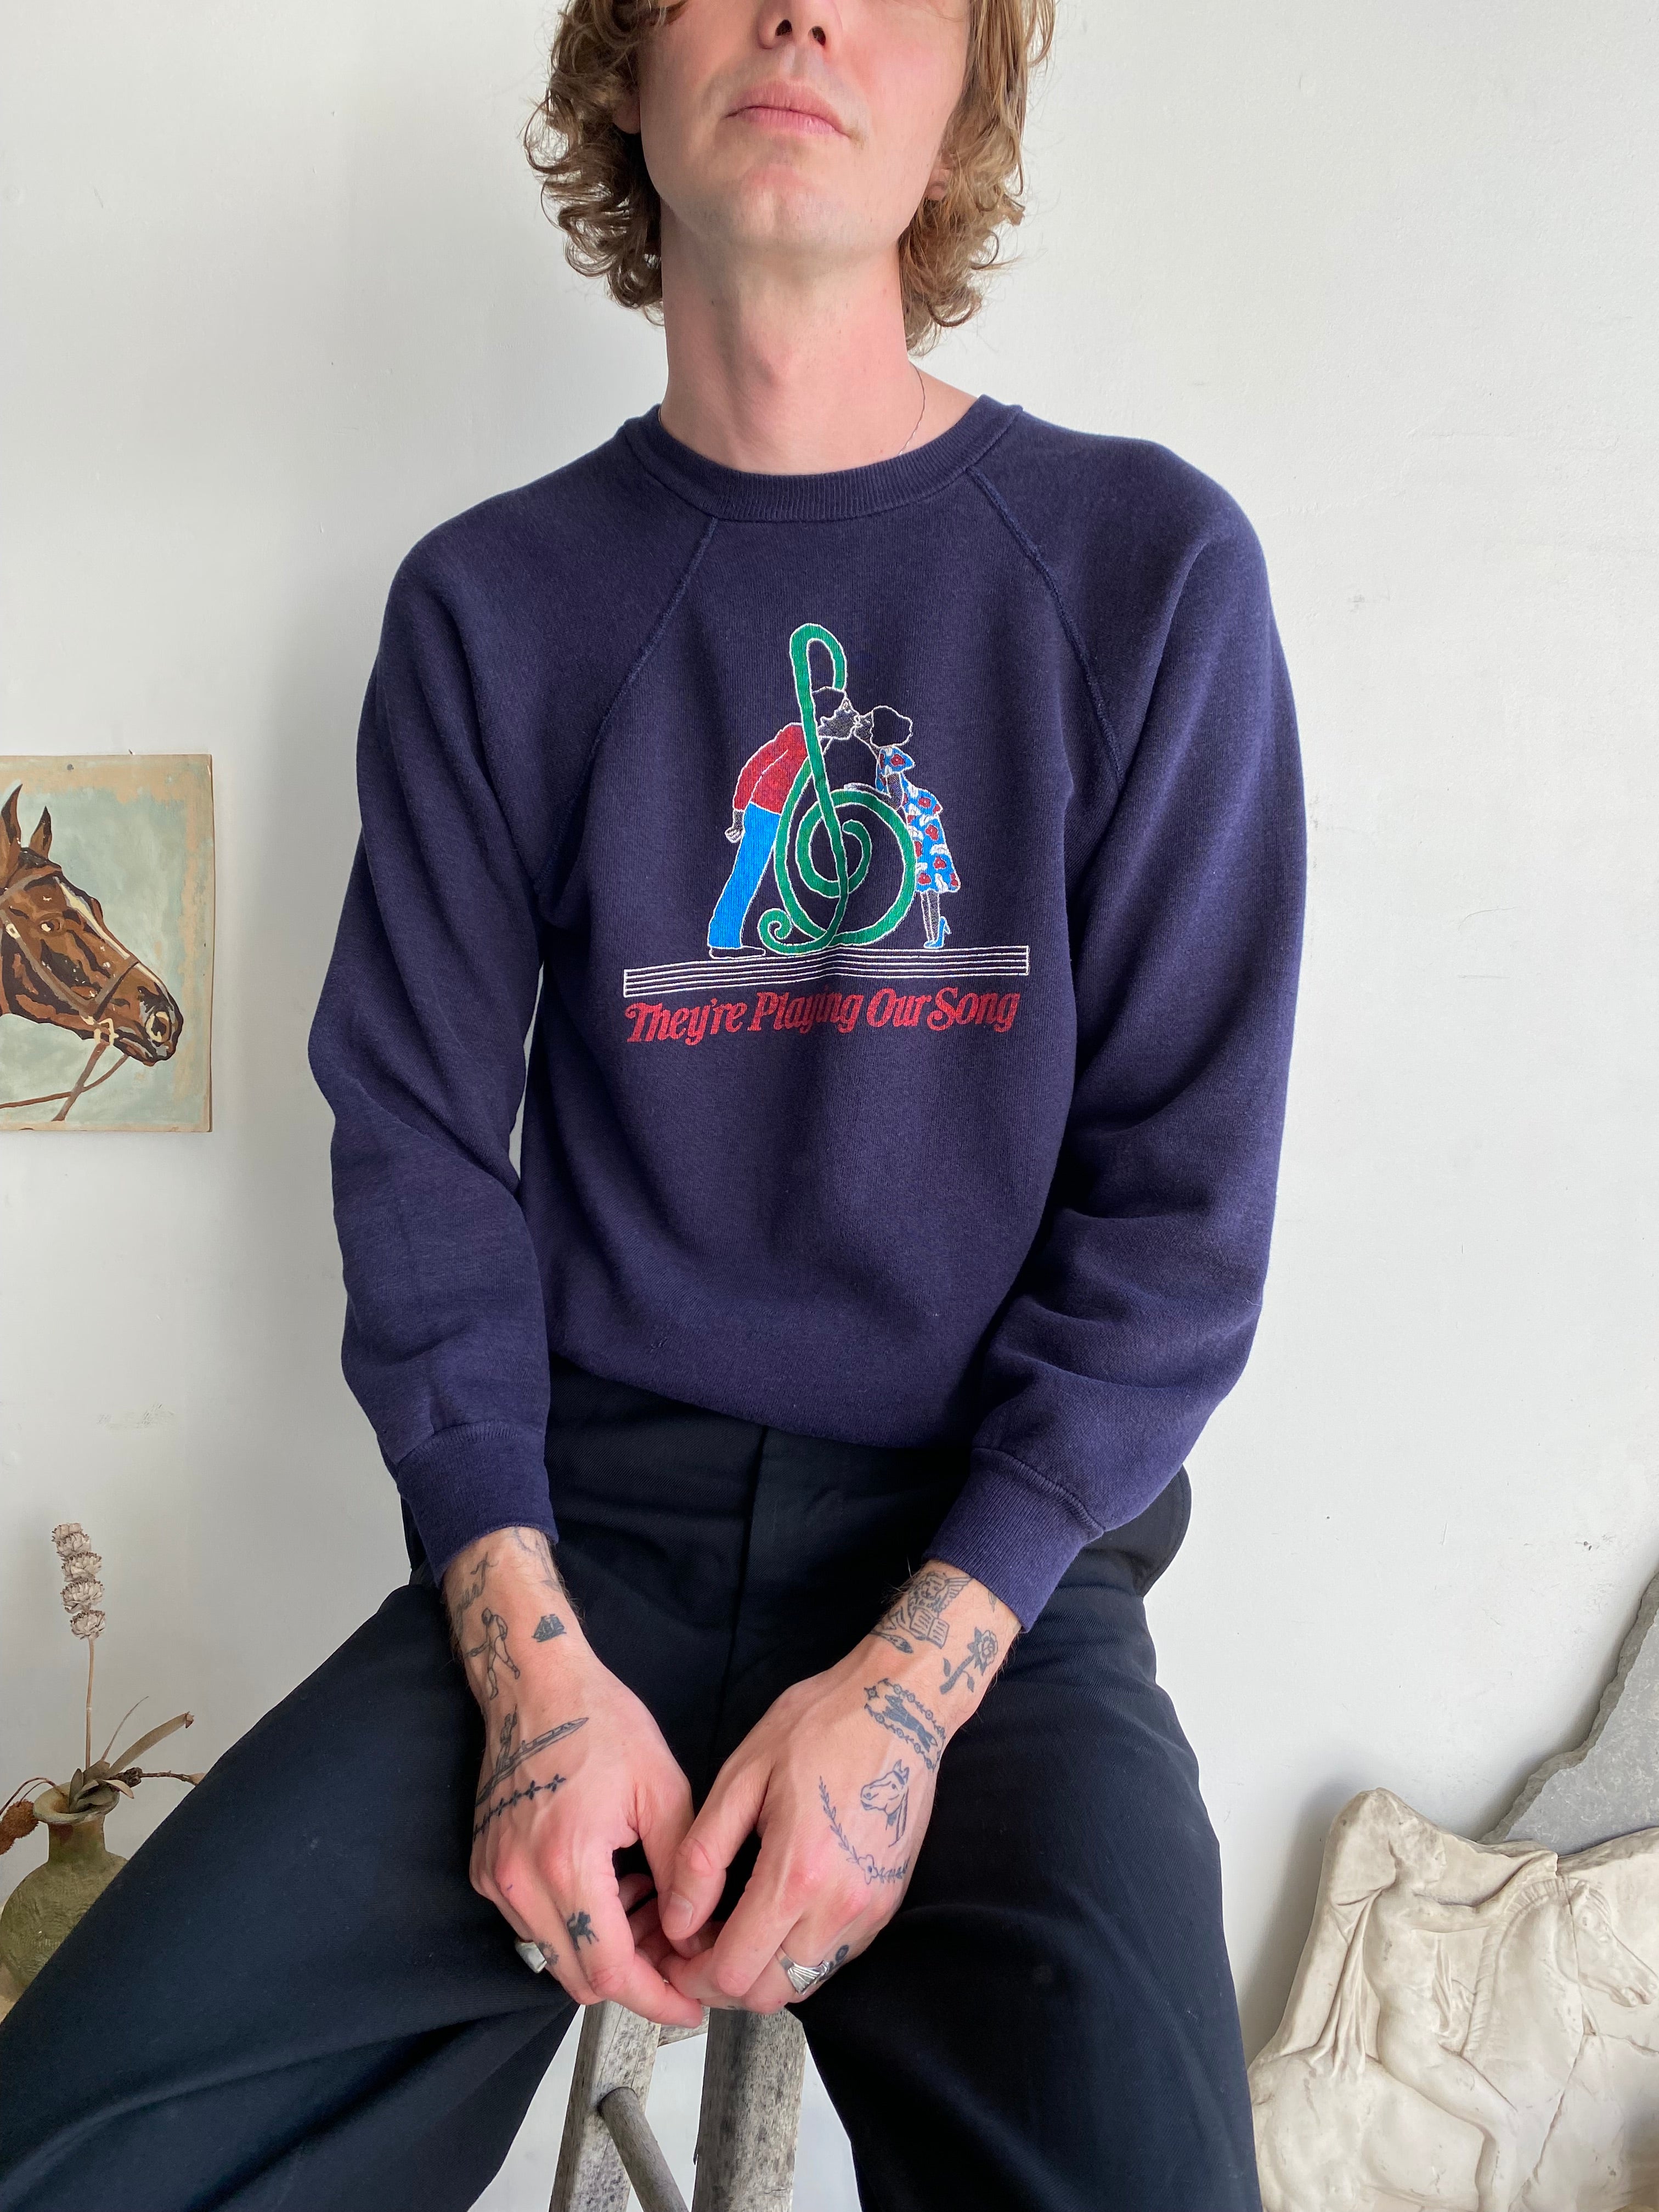 1980s "They're Playing Our Song" Sweatshirt (S)